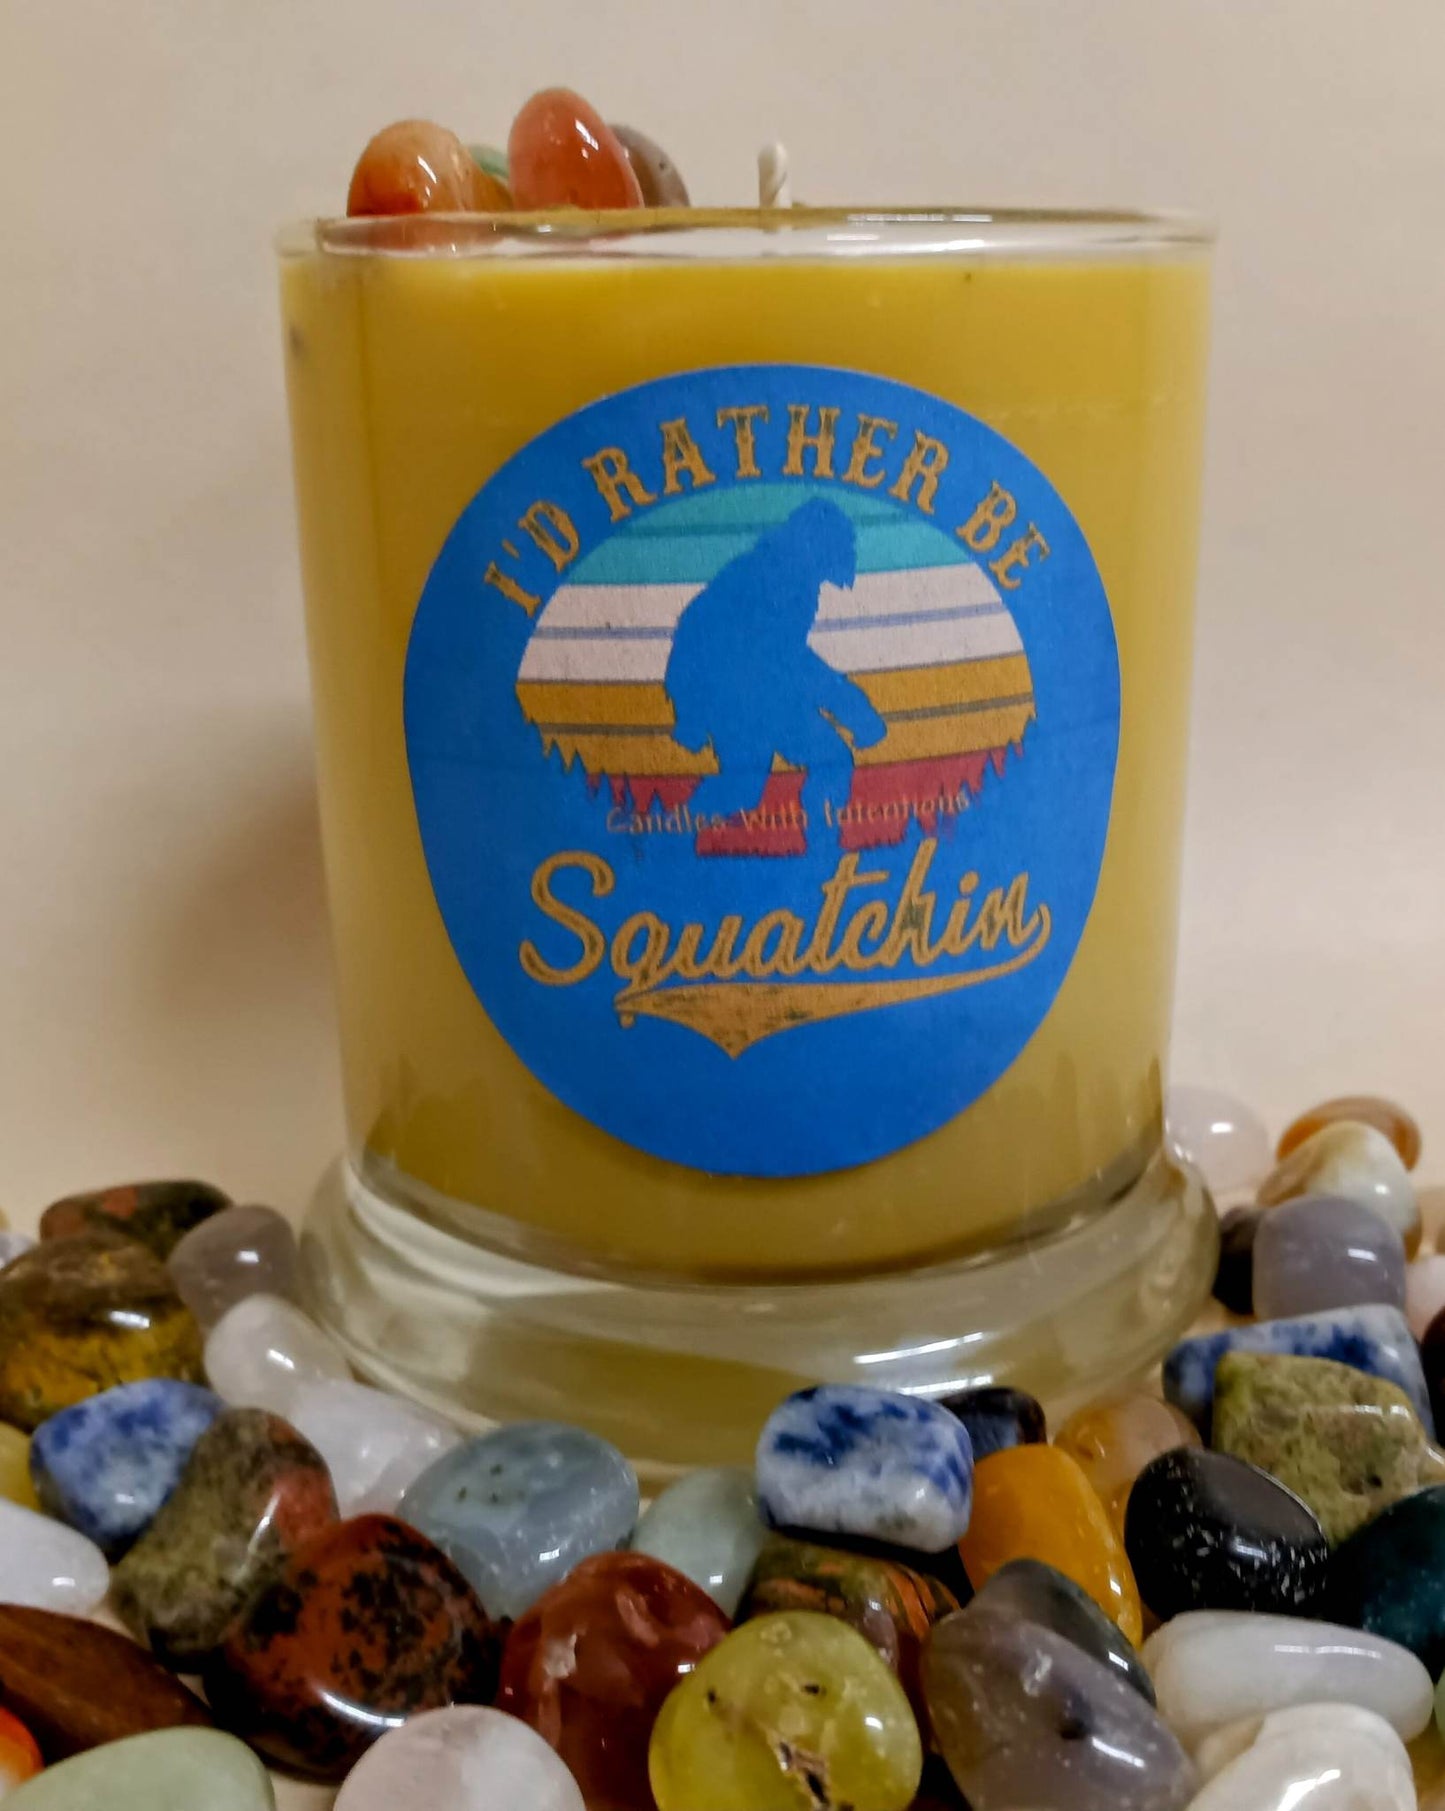 I'd Rather Be Squatchin (Large 12.5oz) Big Foot Candle!